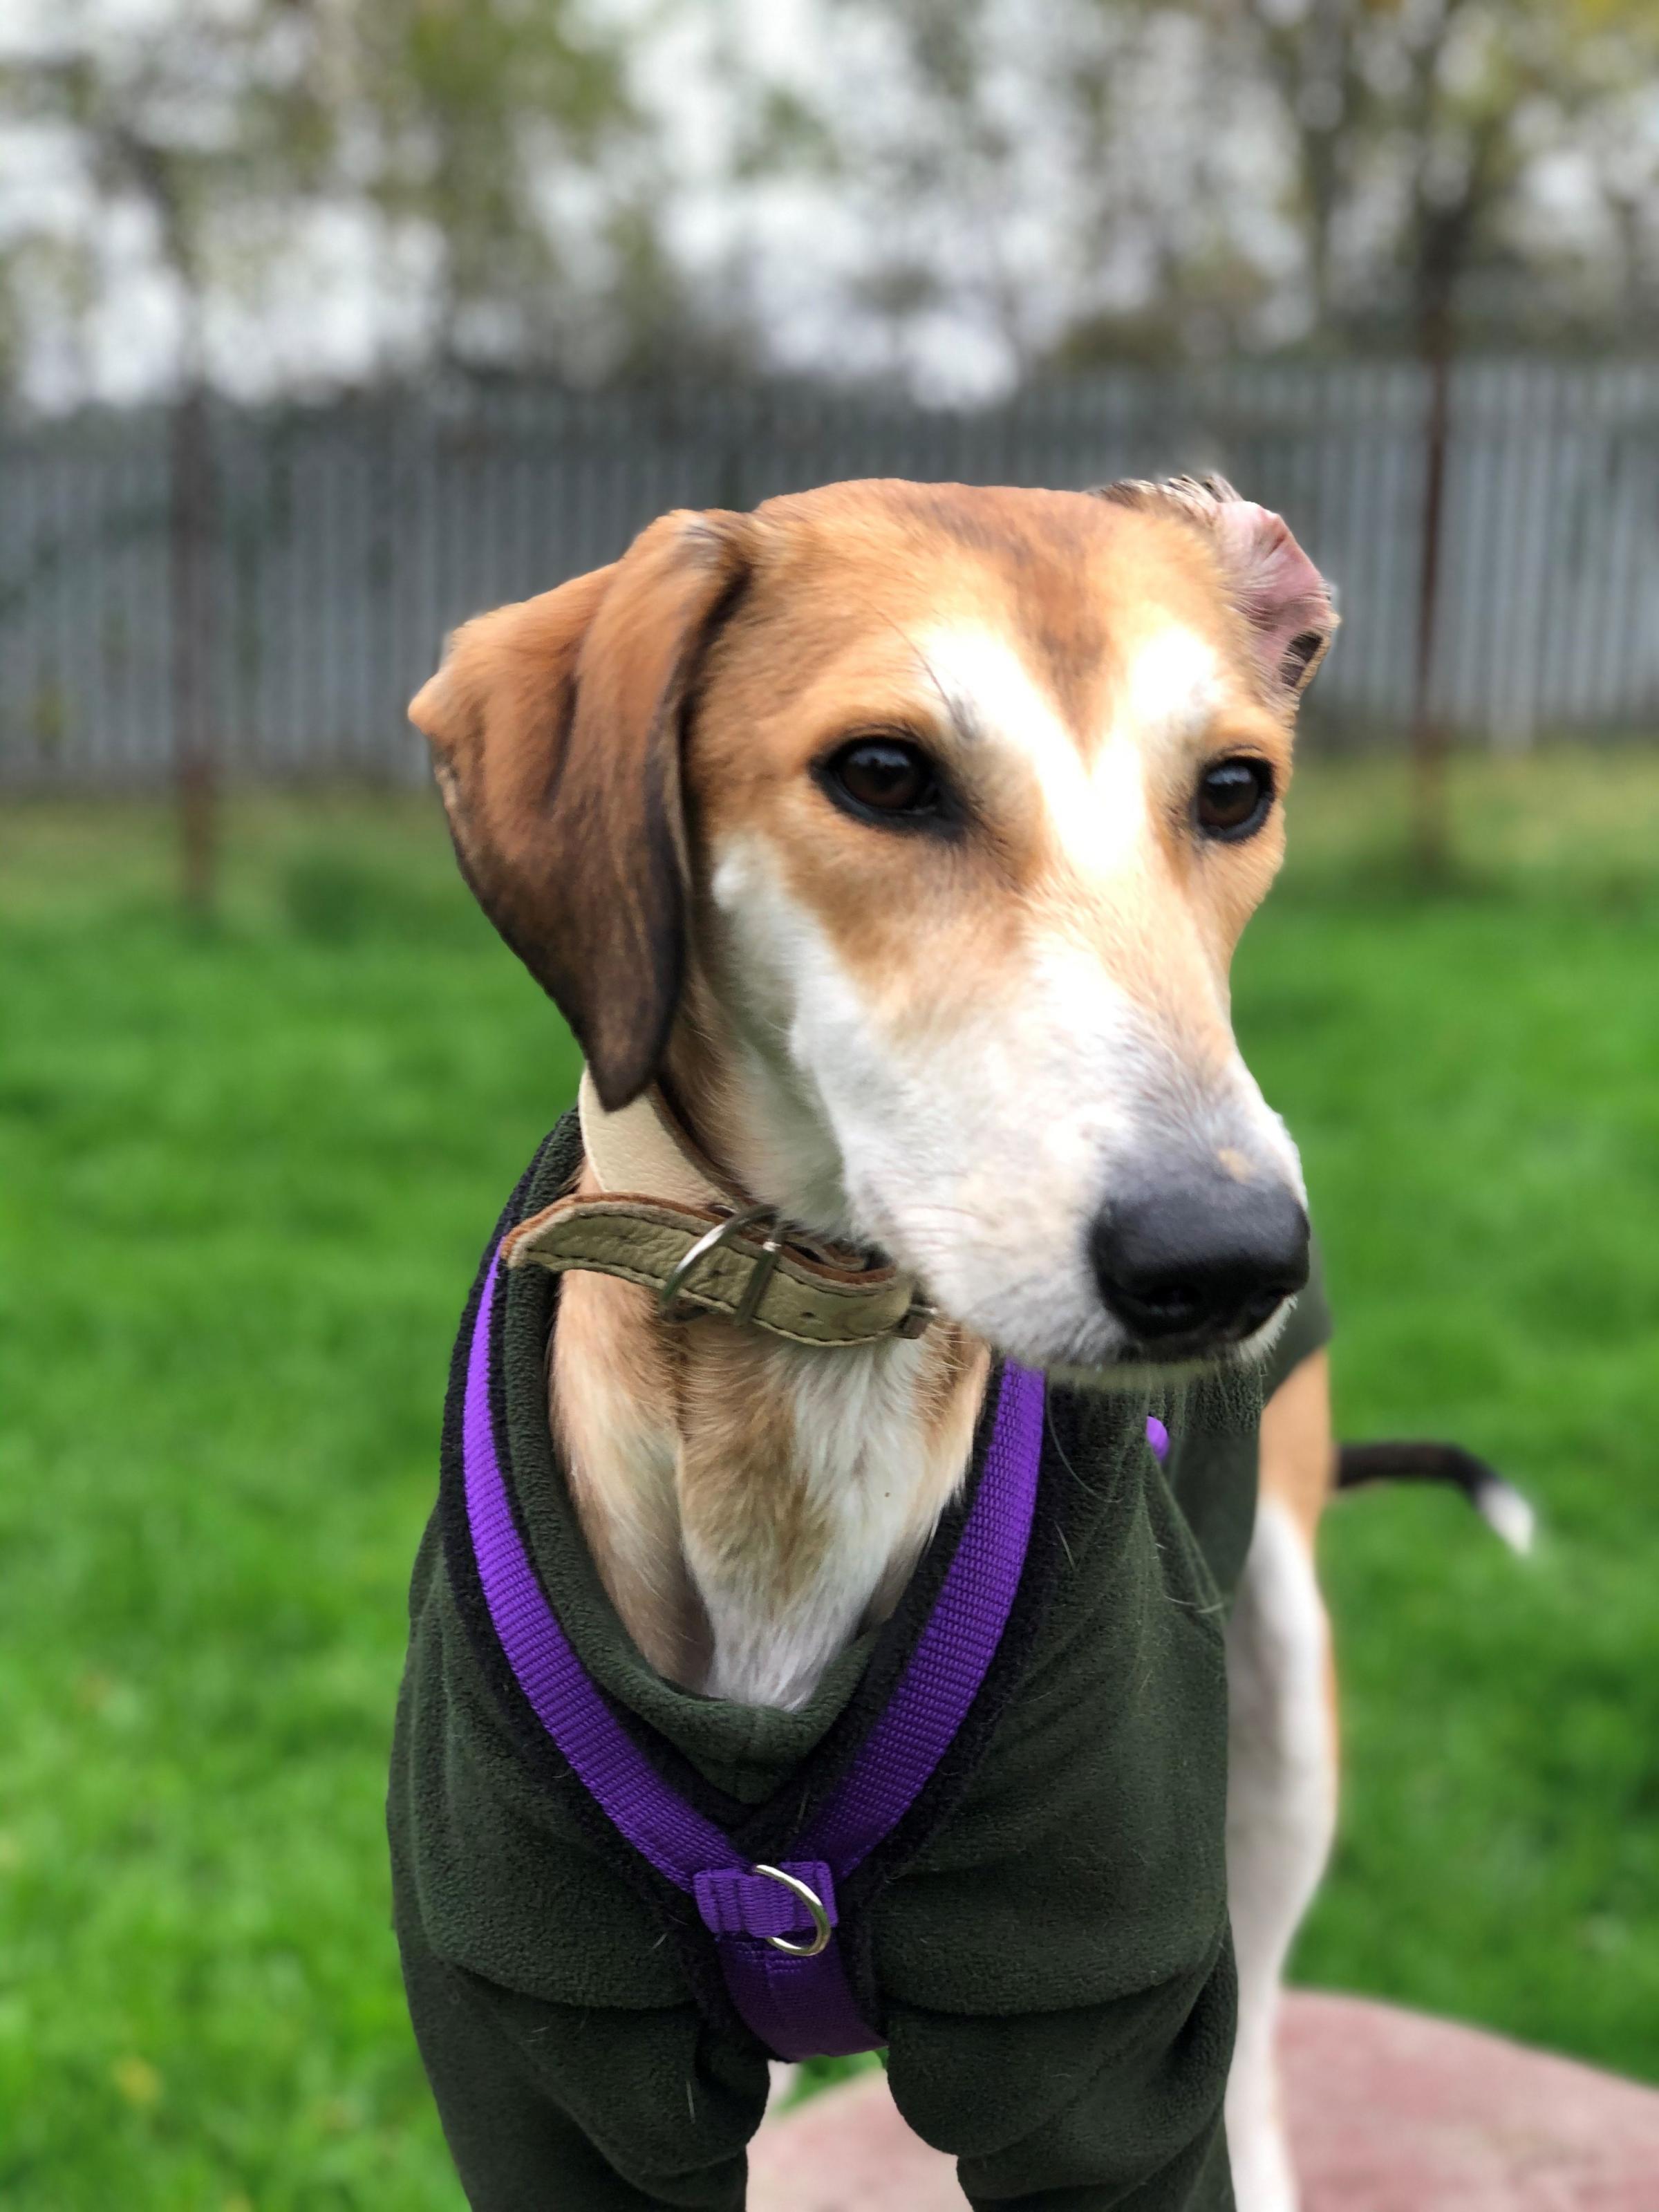 Cookie is a three-year-old femaled lurcher